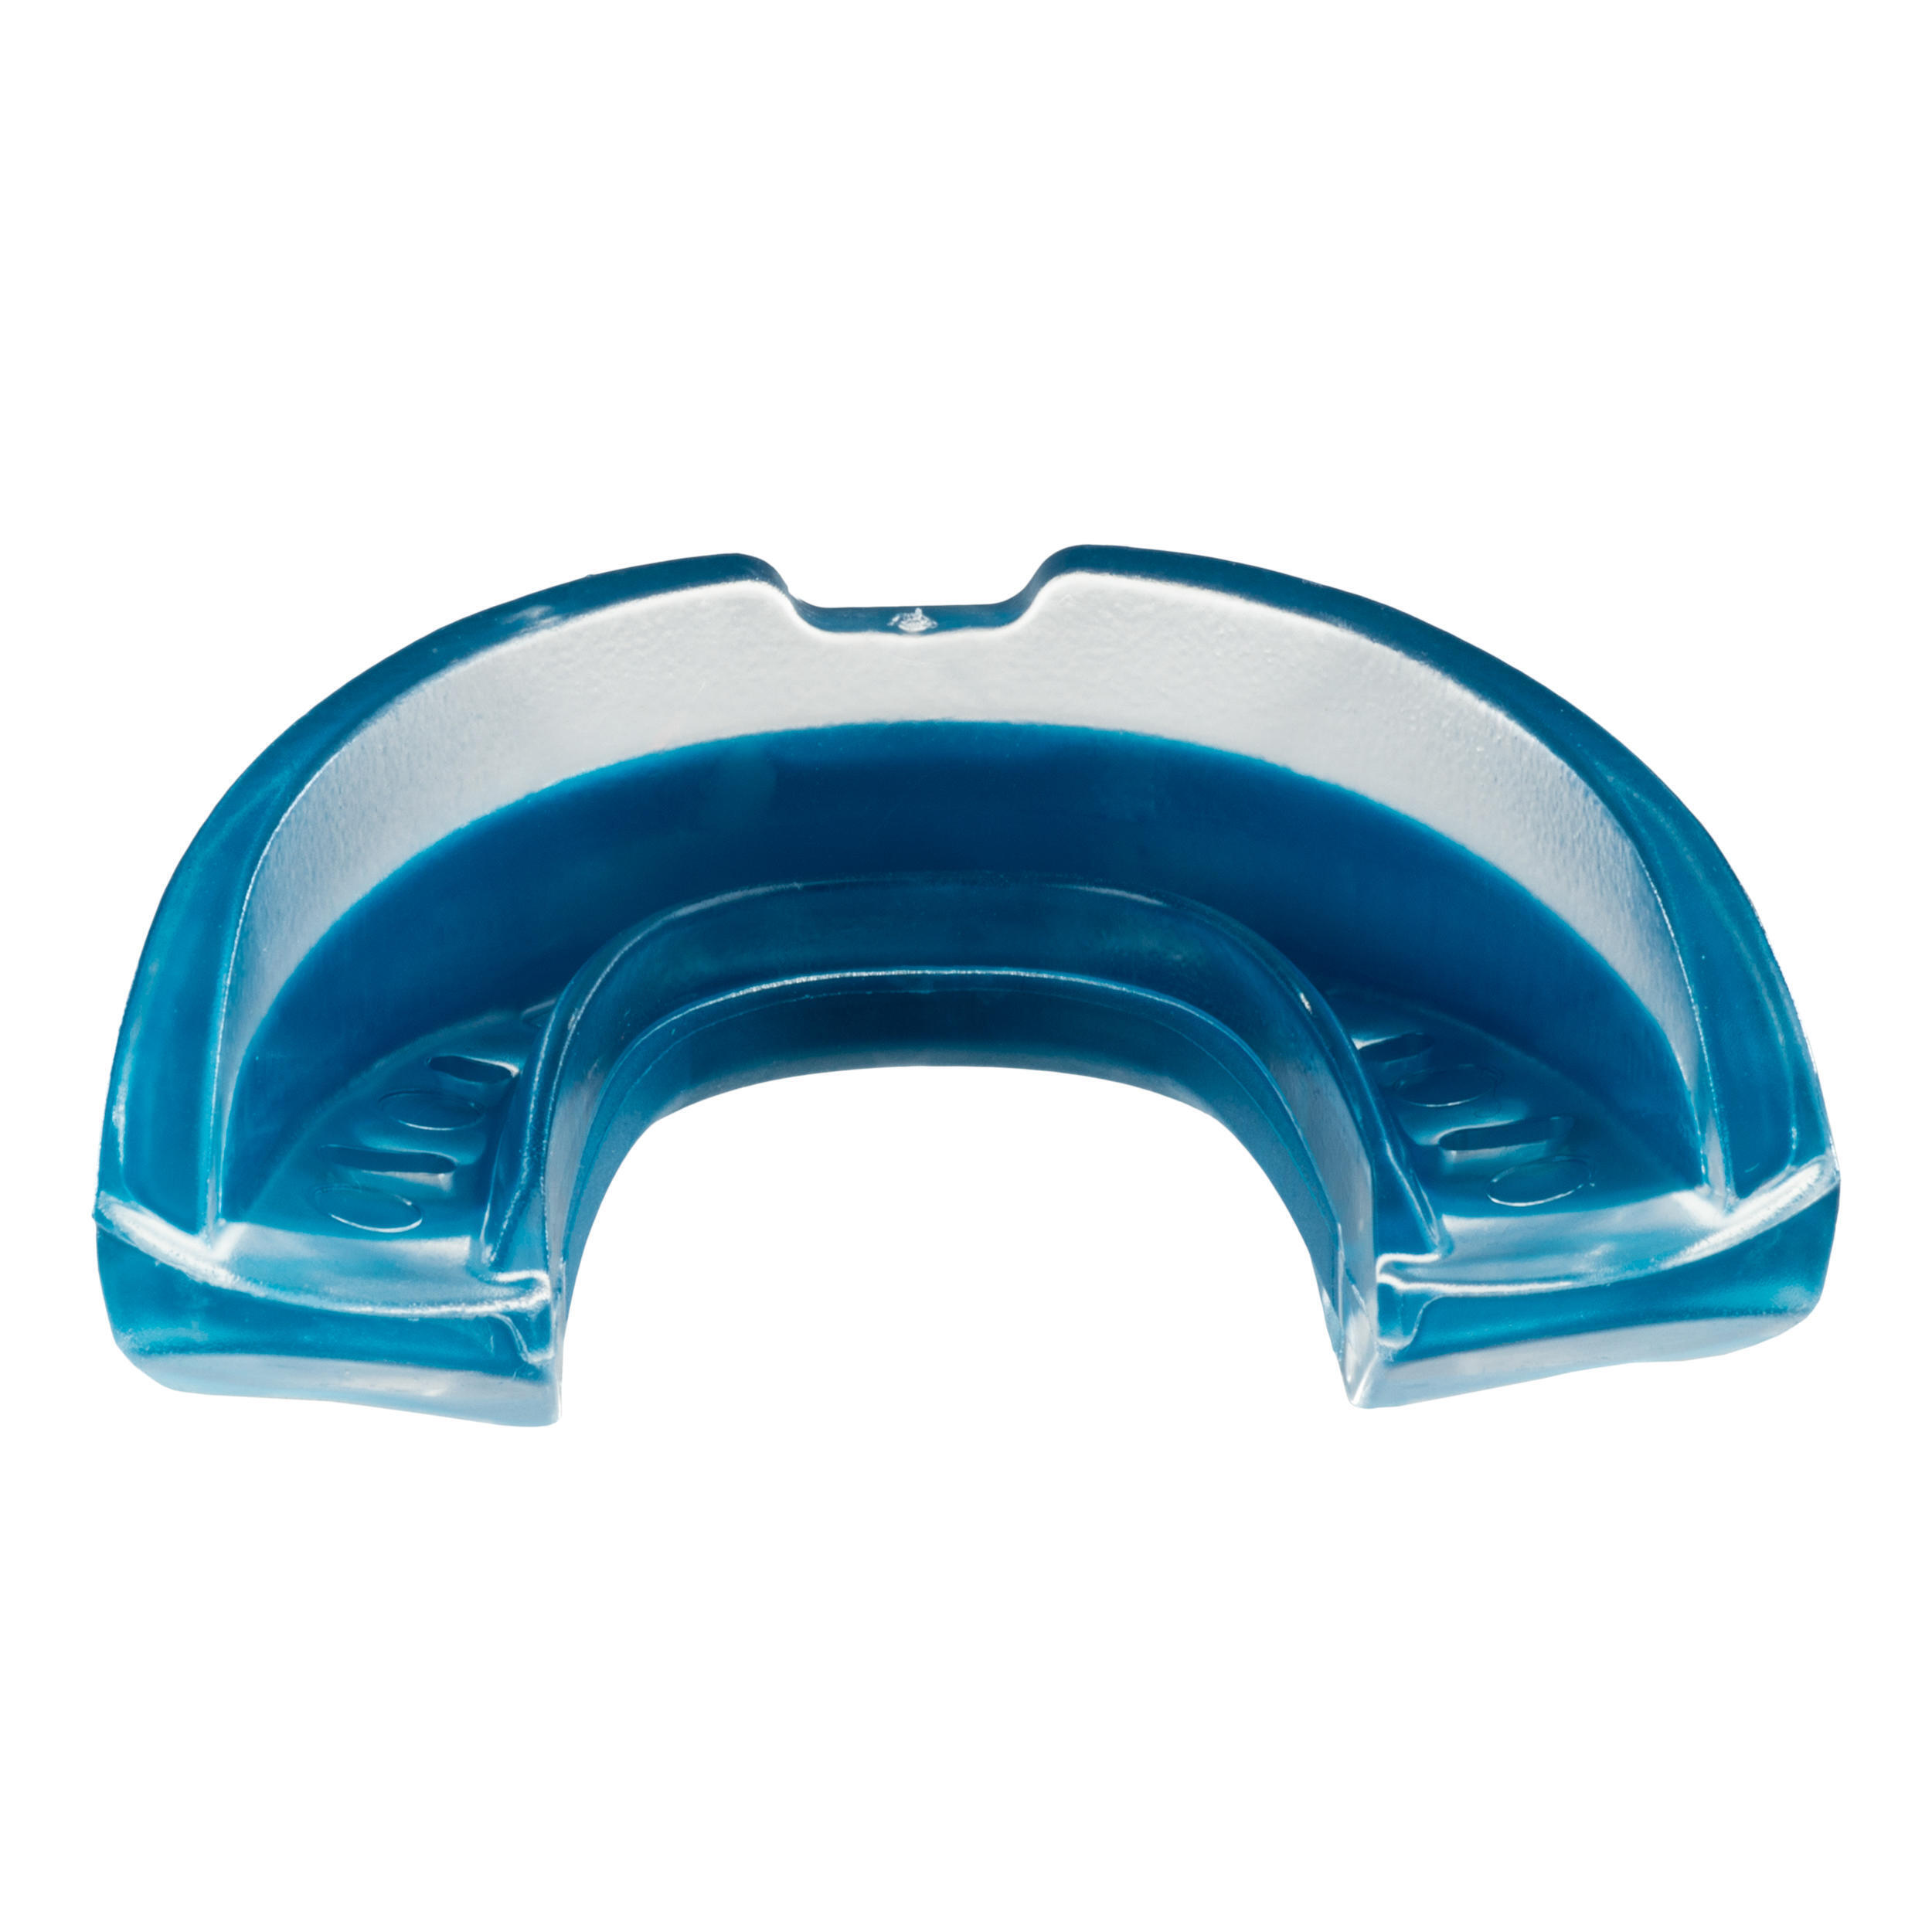 Refurbished Rugby Mouthguard R500 Size L - Blue - A Grade 3/7